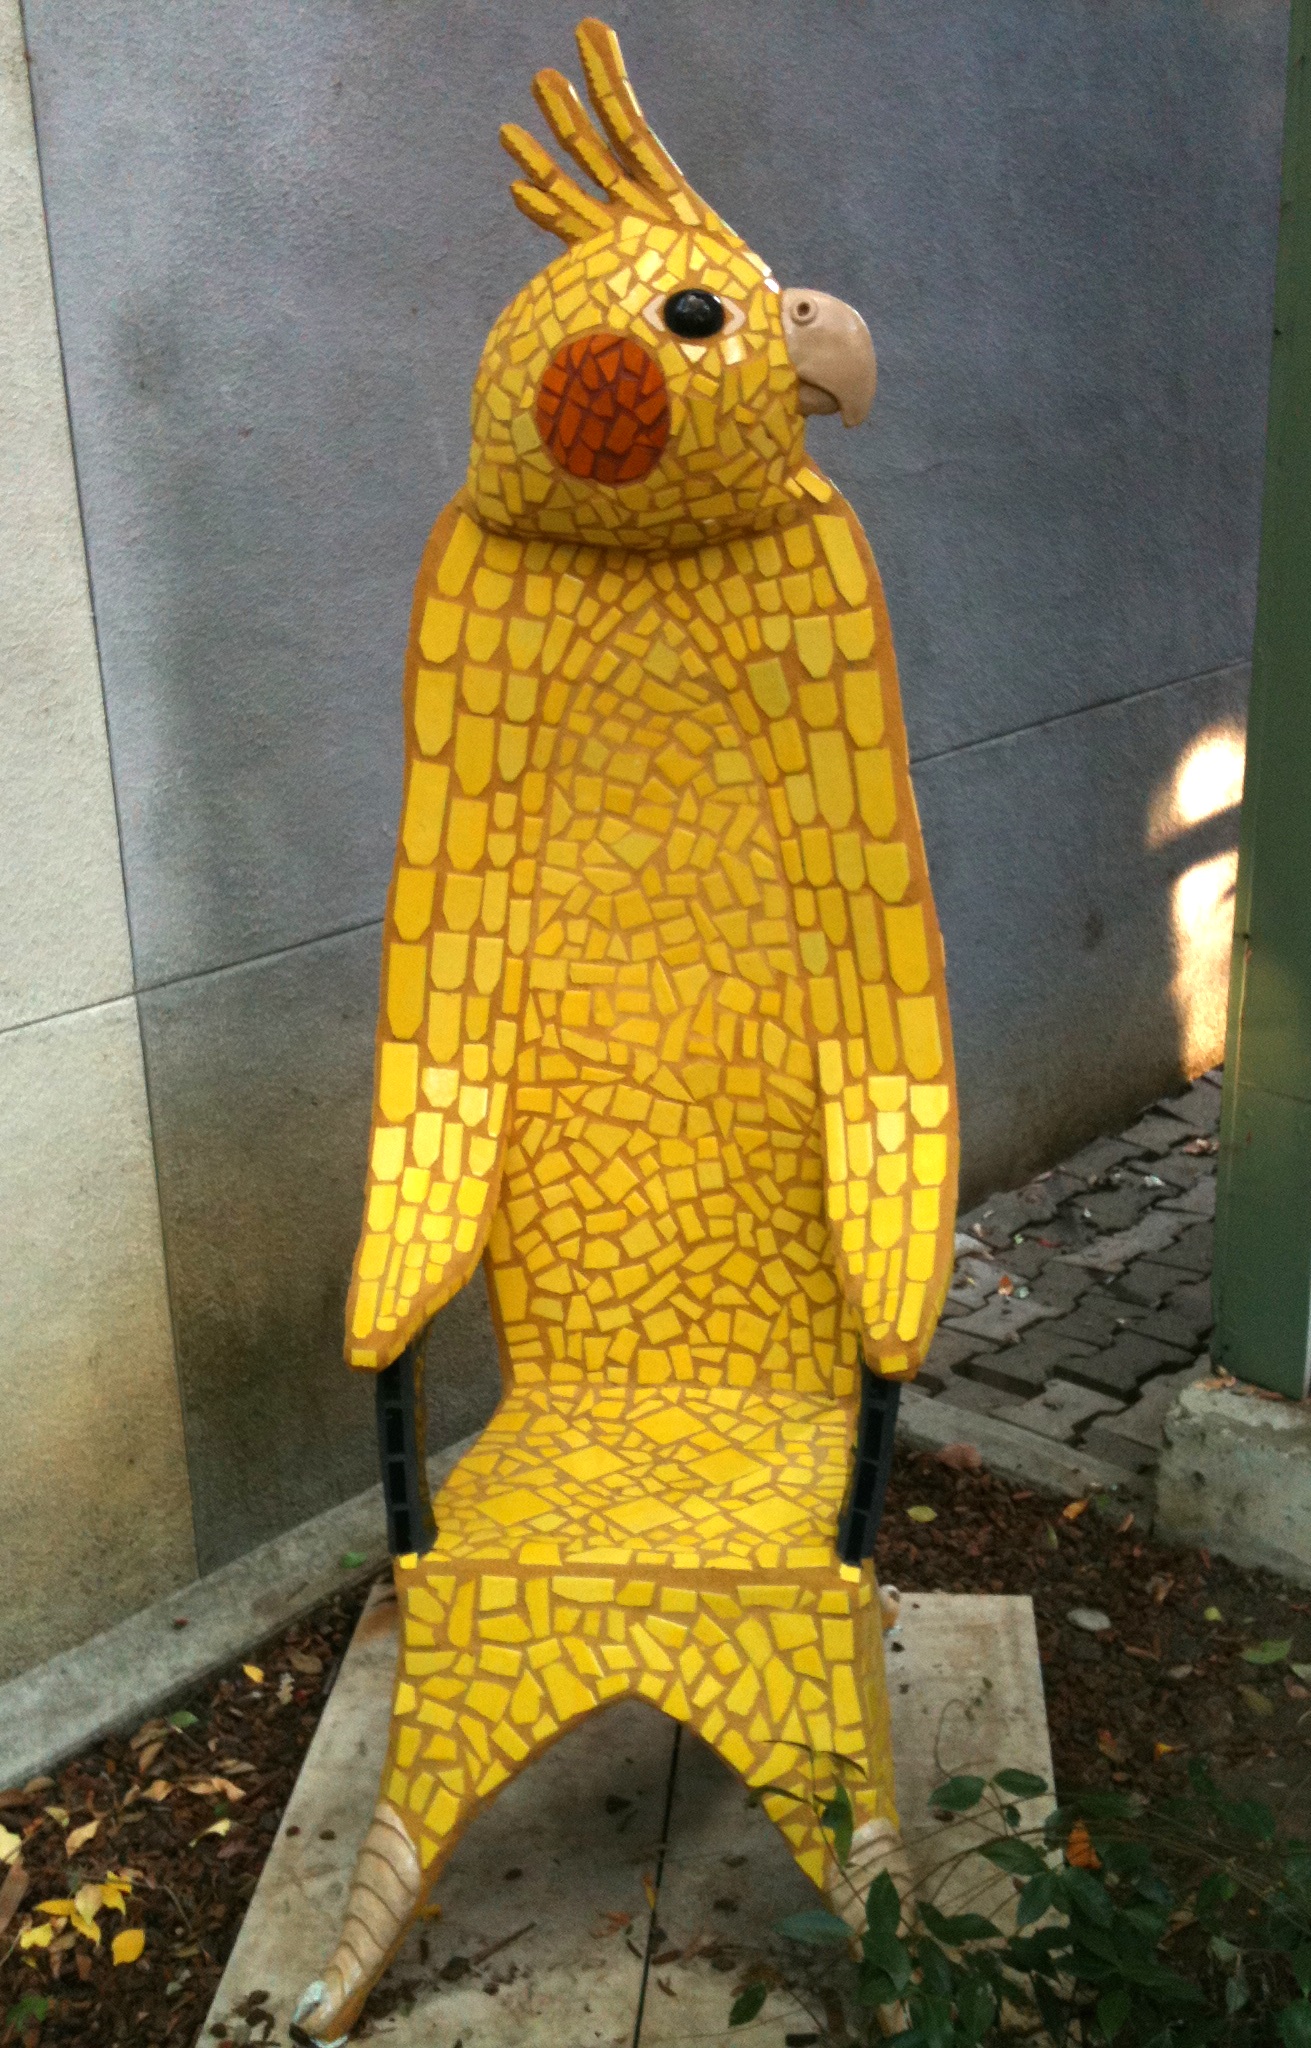  “Polly” 57”x35”x38” Ceramic, mosaic and cement 2011 Located on D st in downtown Davis, California adjacent to The Tea List    